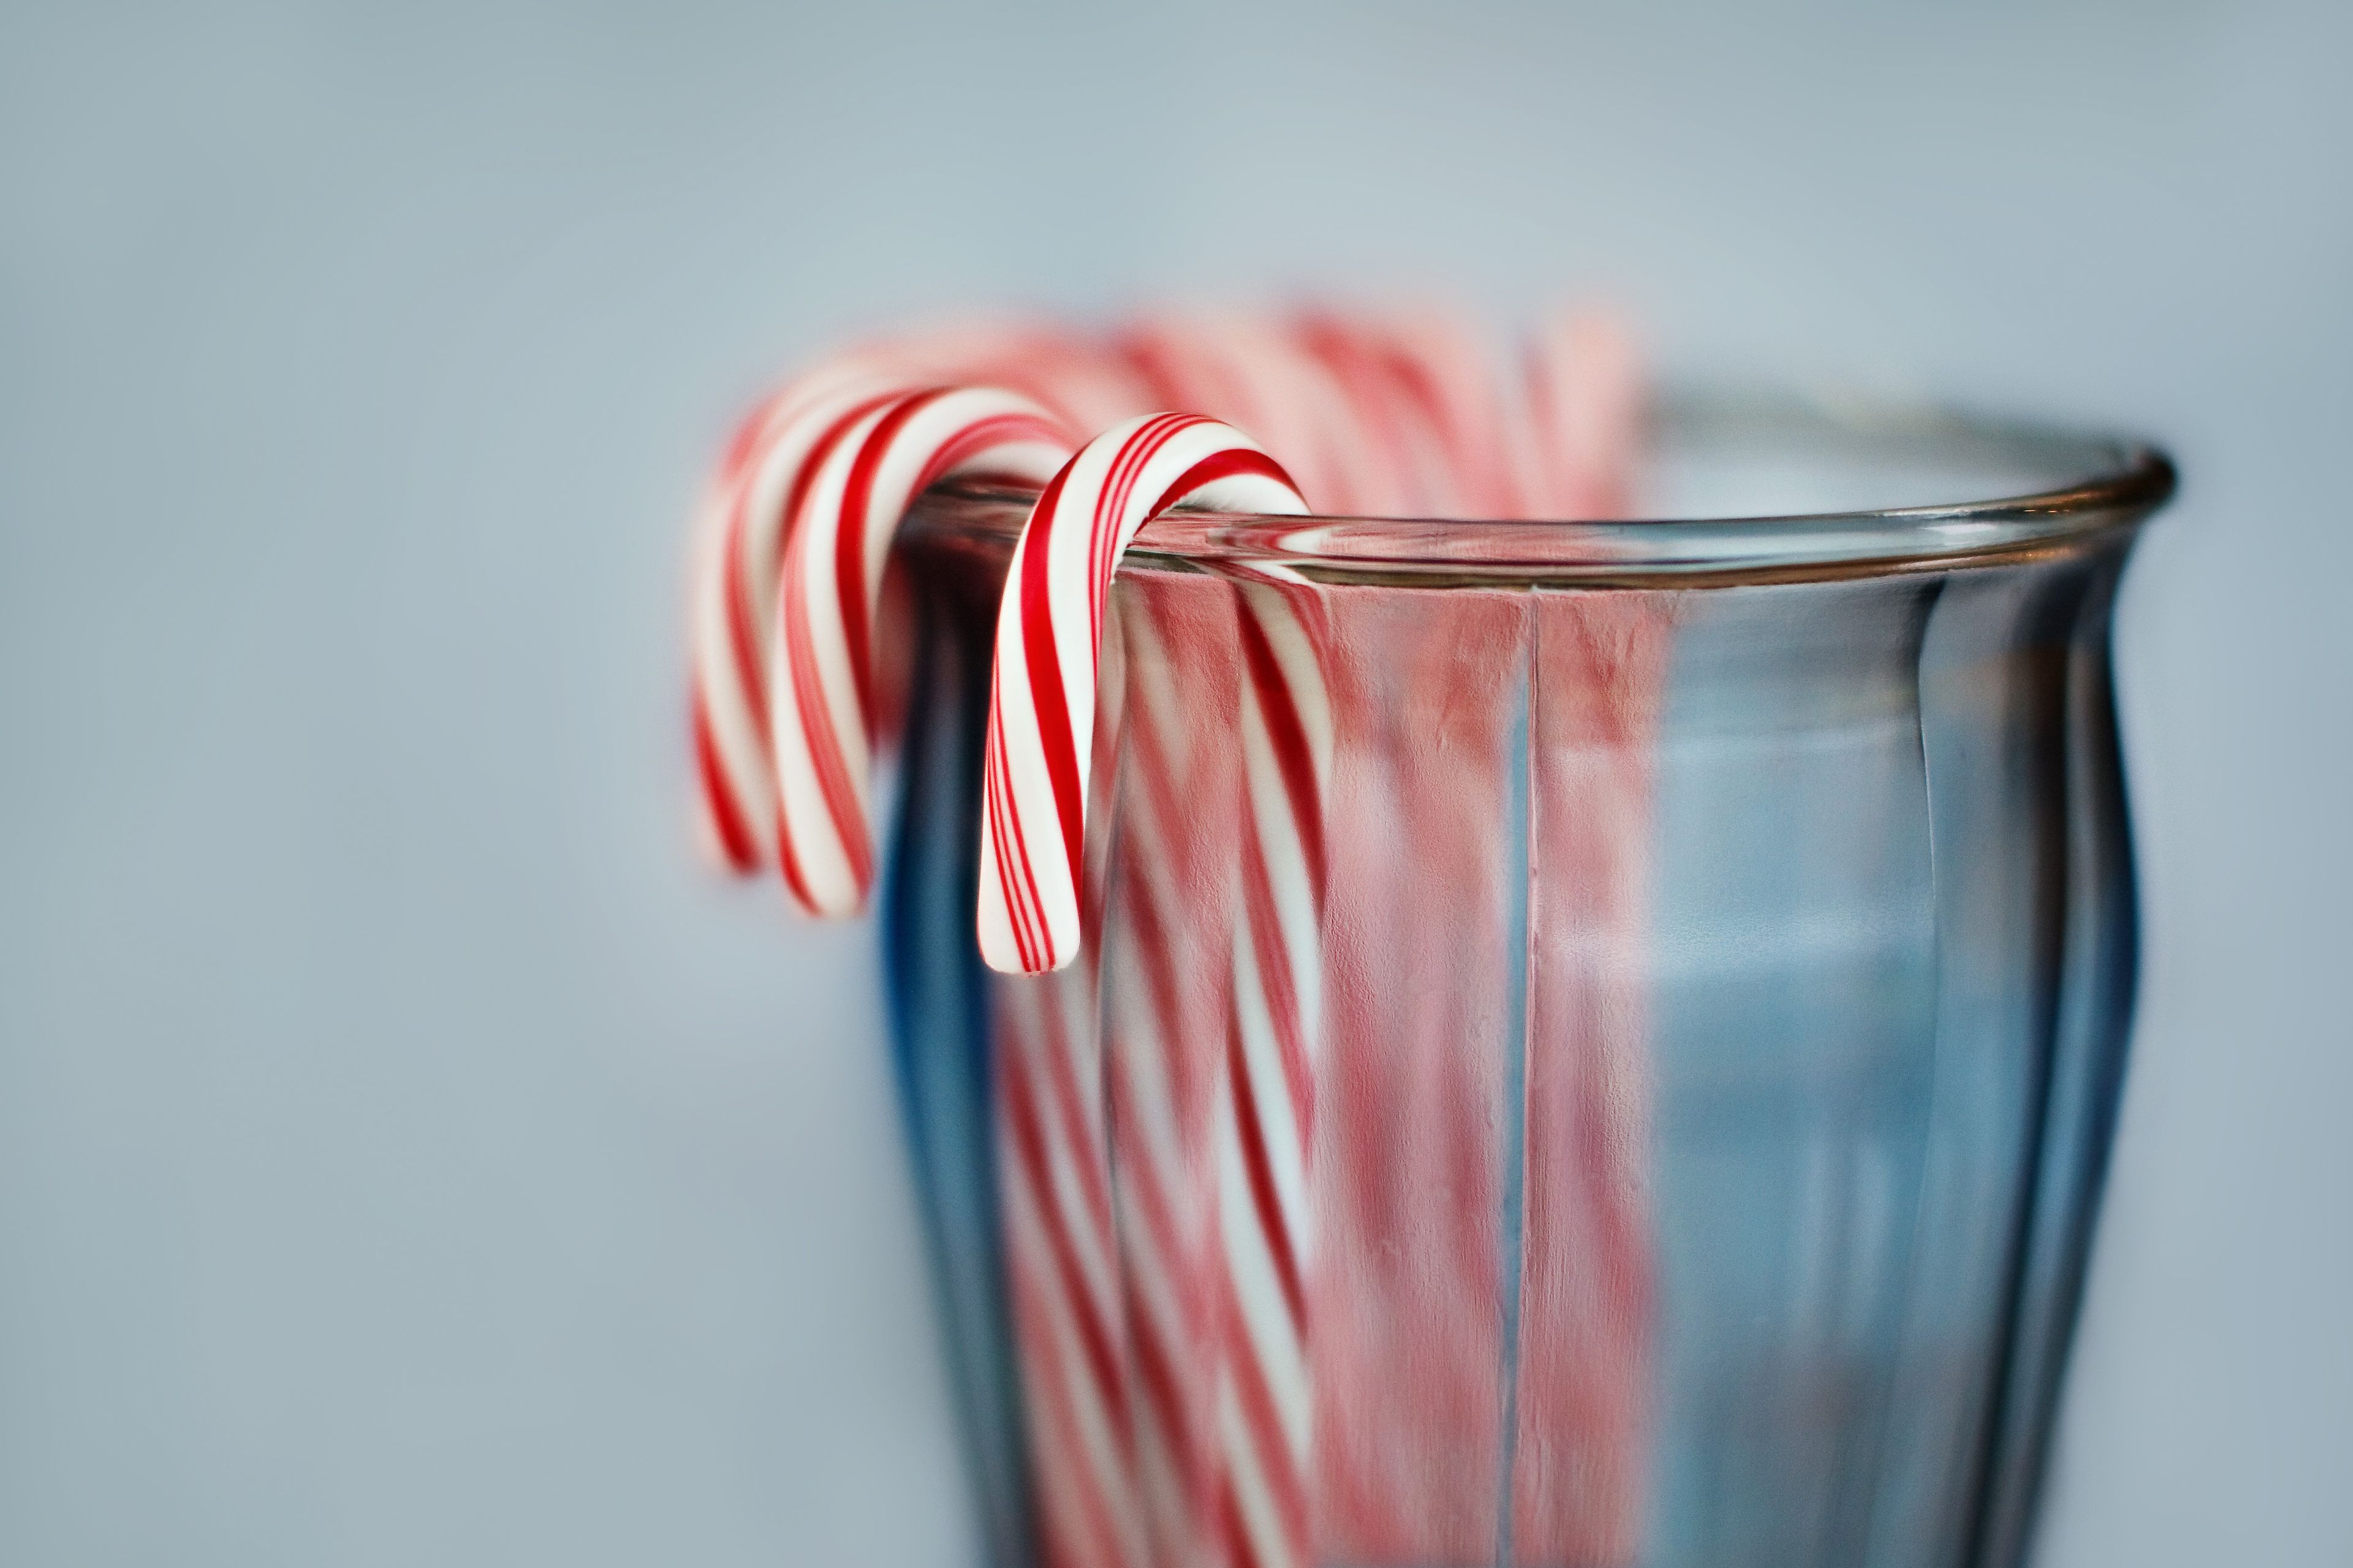 An image of candy canes in a jar.